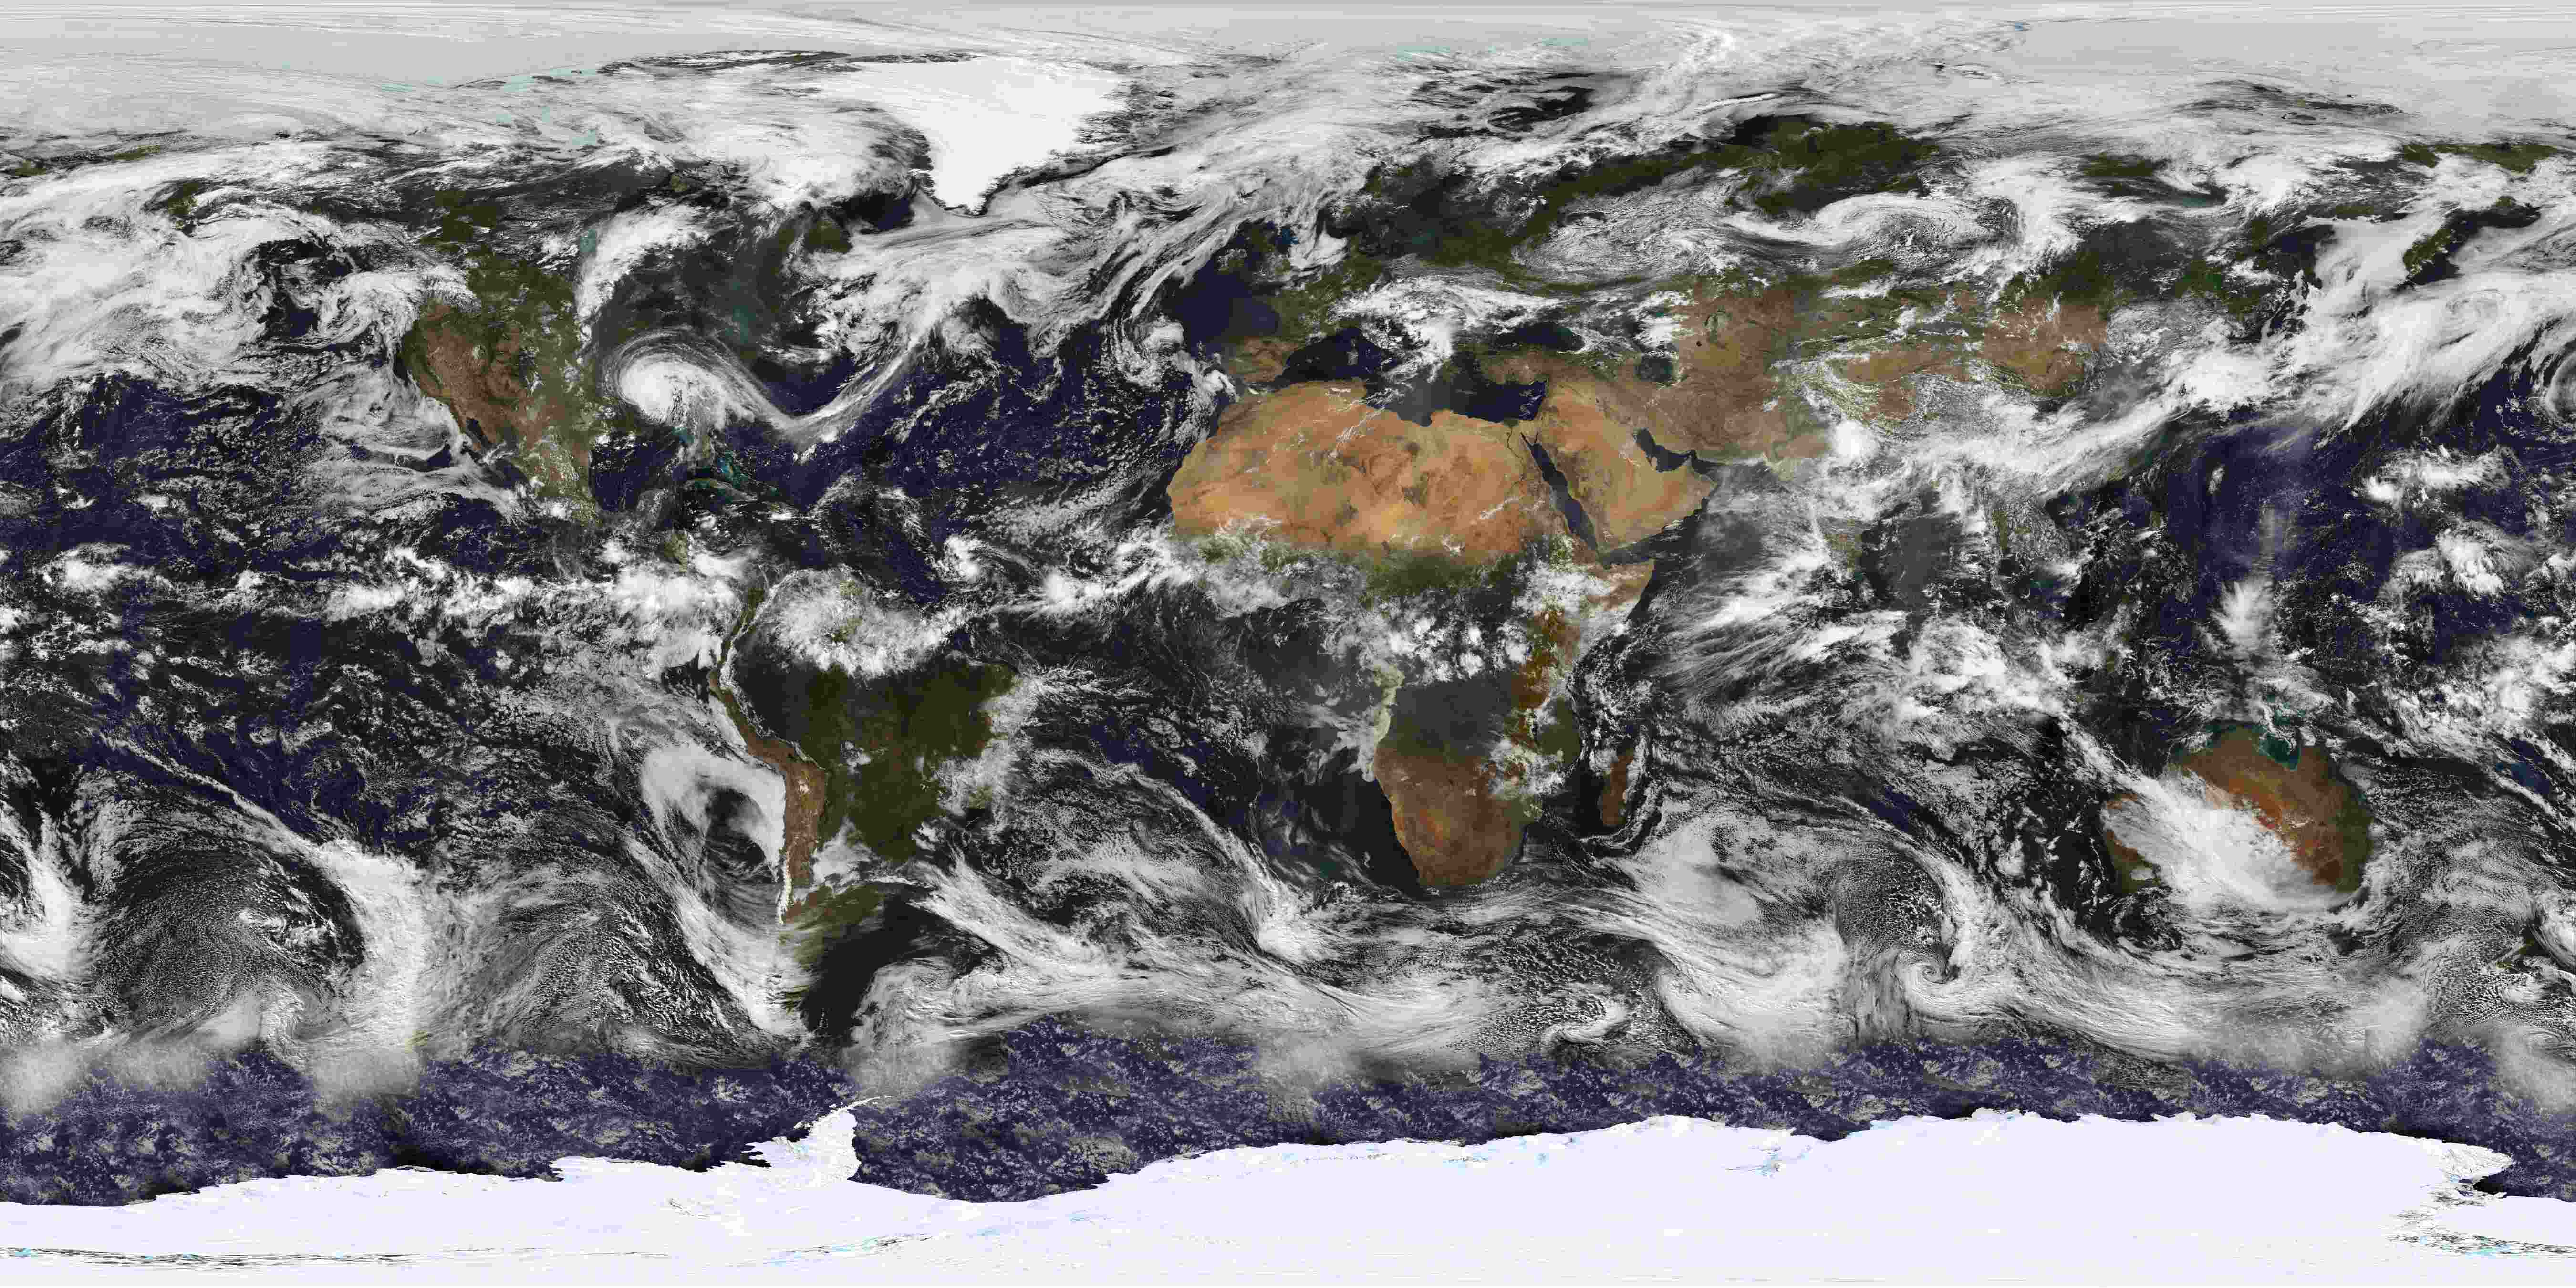 Images Wikimedia Commons/19 NASA MODIS Earth Map Of Storms.jpg